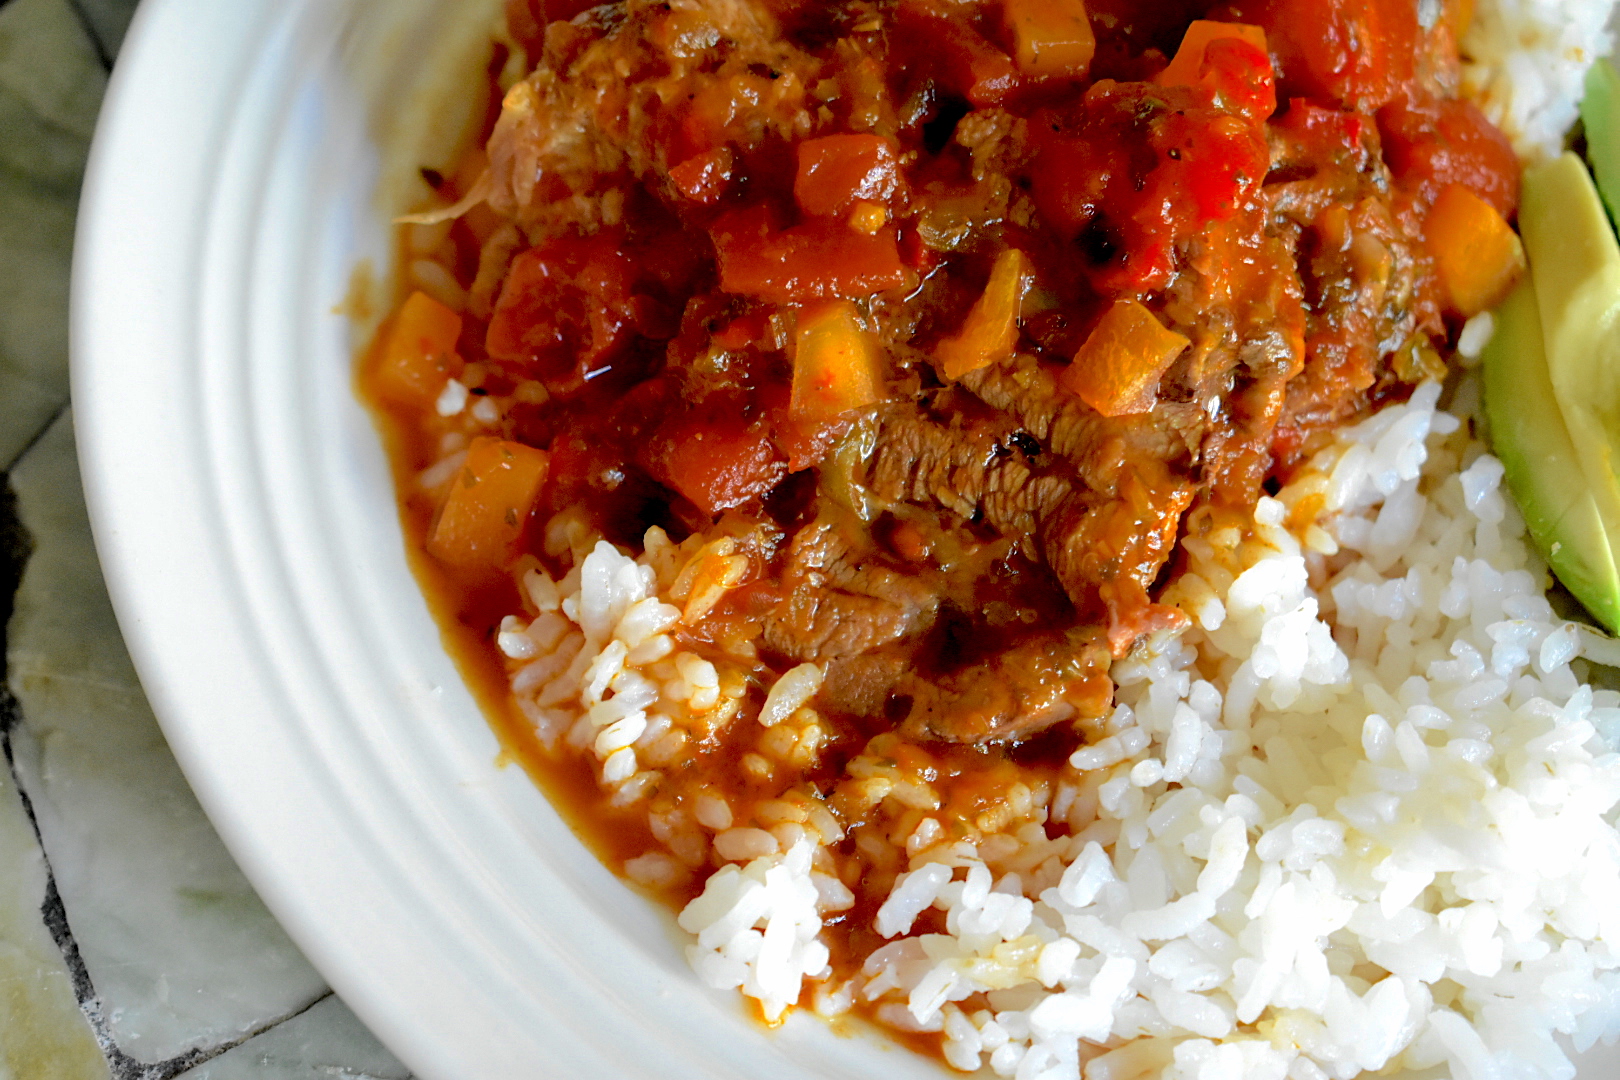 Abuela’s Oxtail Stew